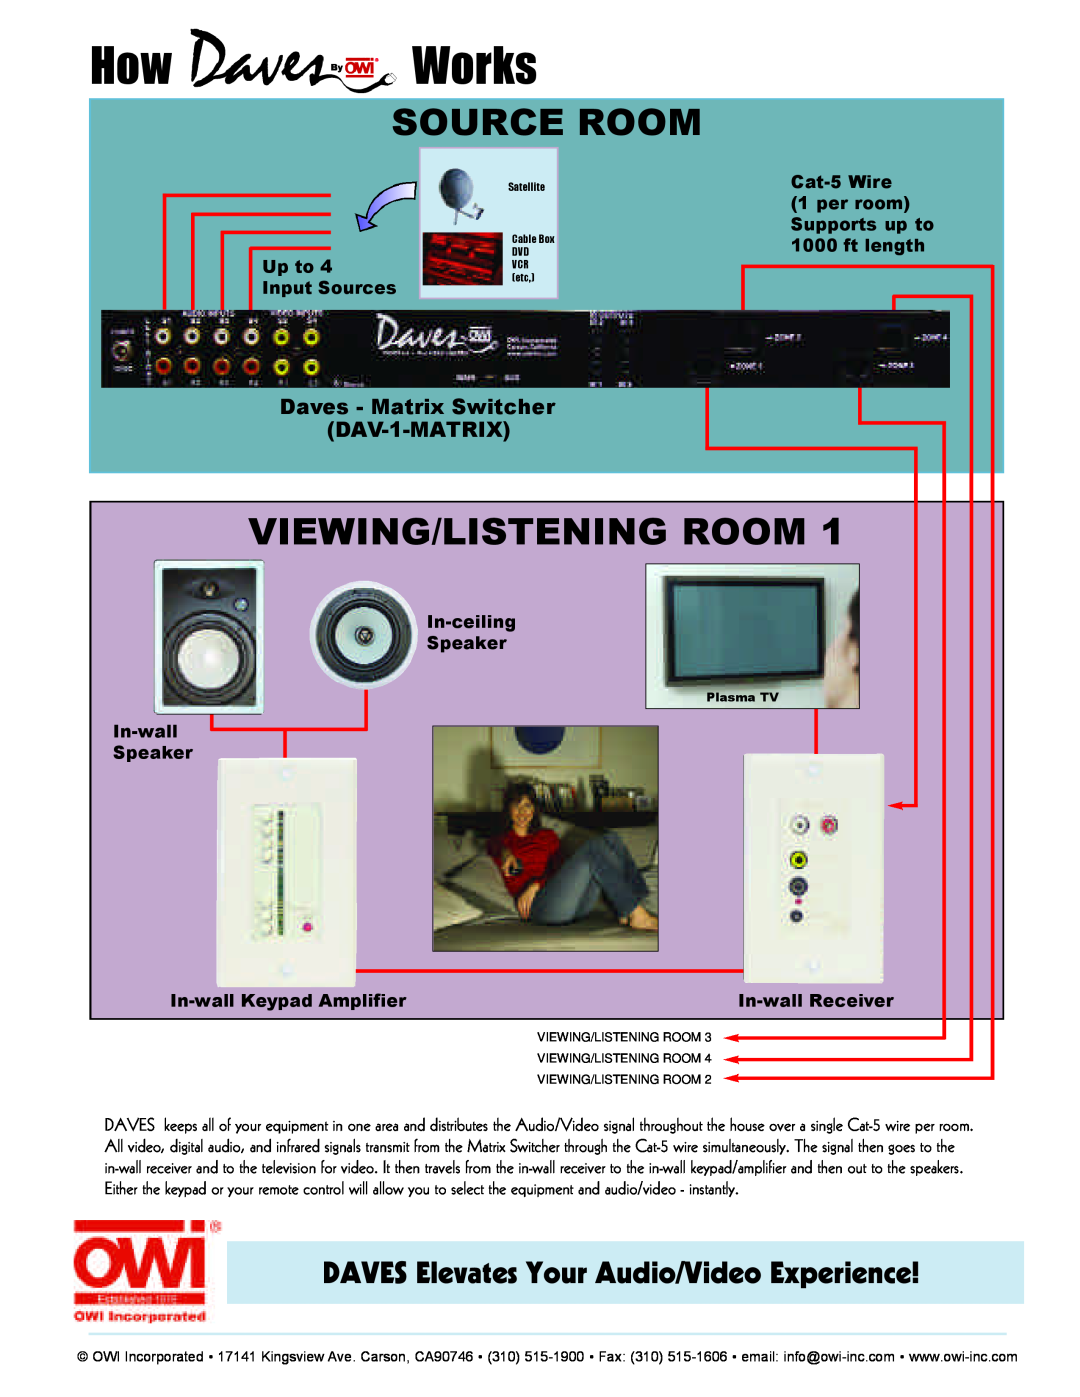 OWI none HowWorks, Source Room, Viewing/Listening Room, DAVES Elevates Your Audio/Video Experience, Up to, Input Sources 